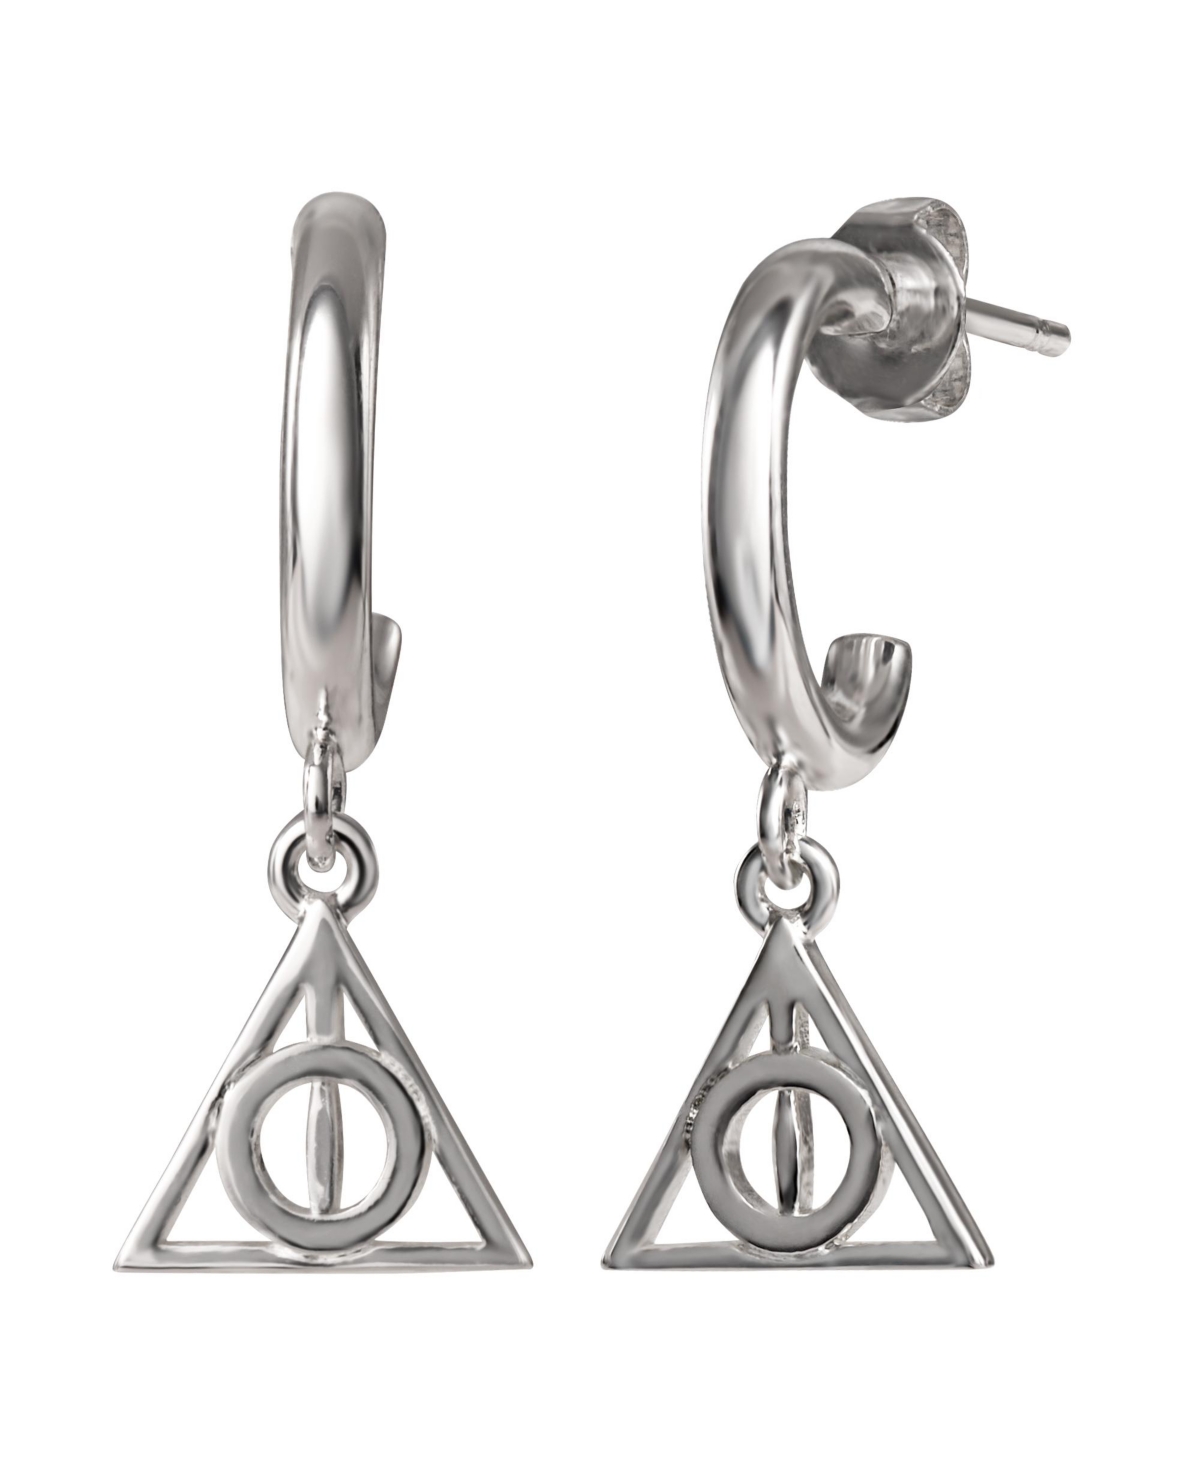 Silver Plated Hoop Earrings with Dangle Deathly Hallows Charm - Silver